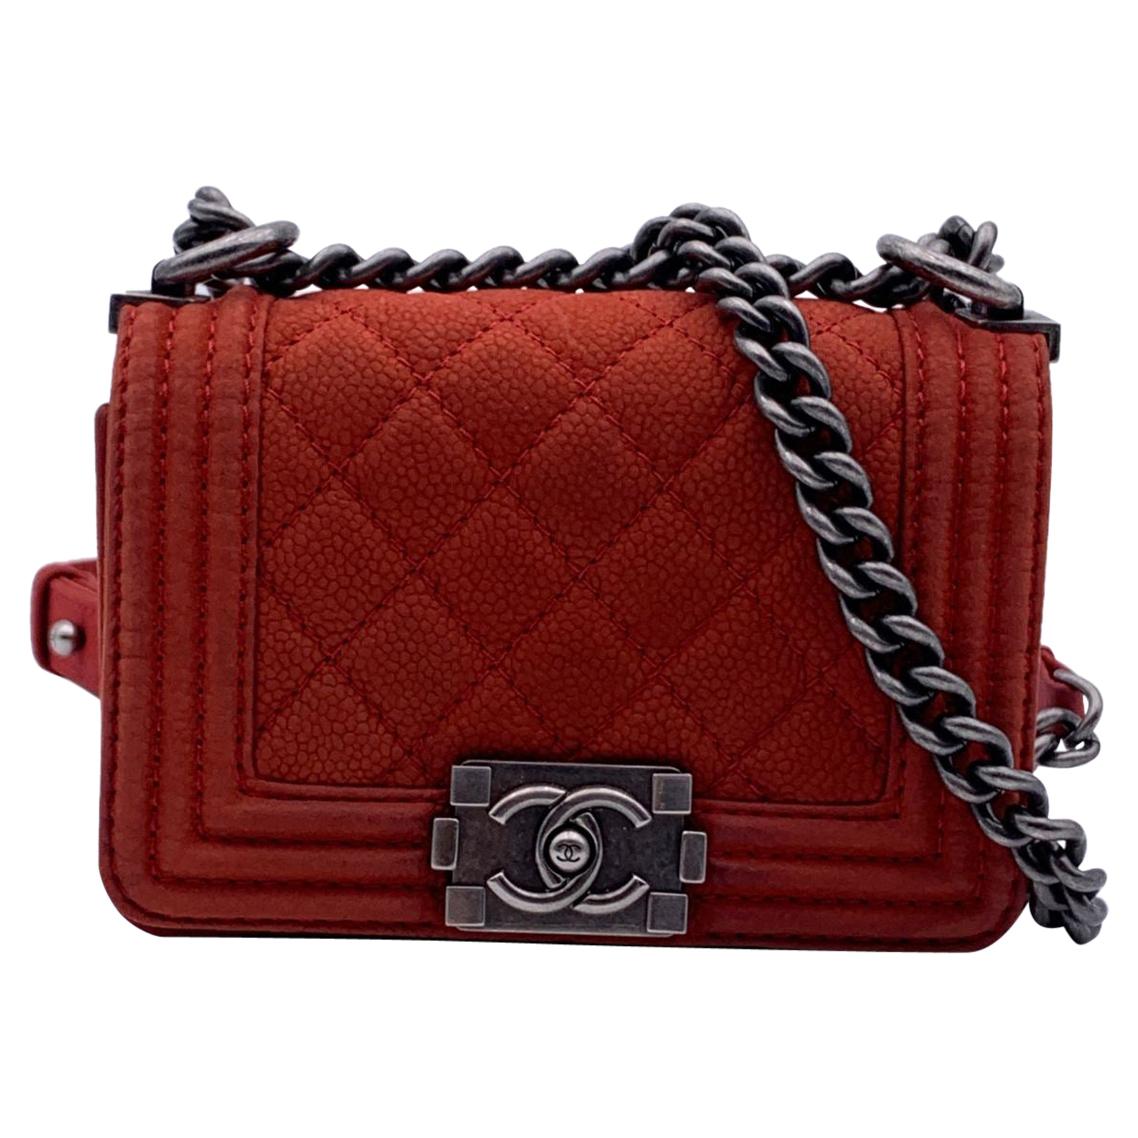 Chanel Red Quilted Leather Caviar Mini Boy Shoulder Bag